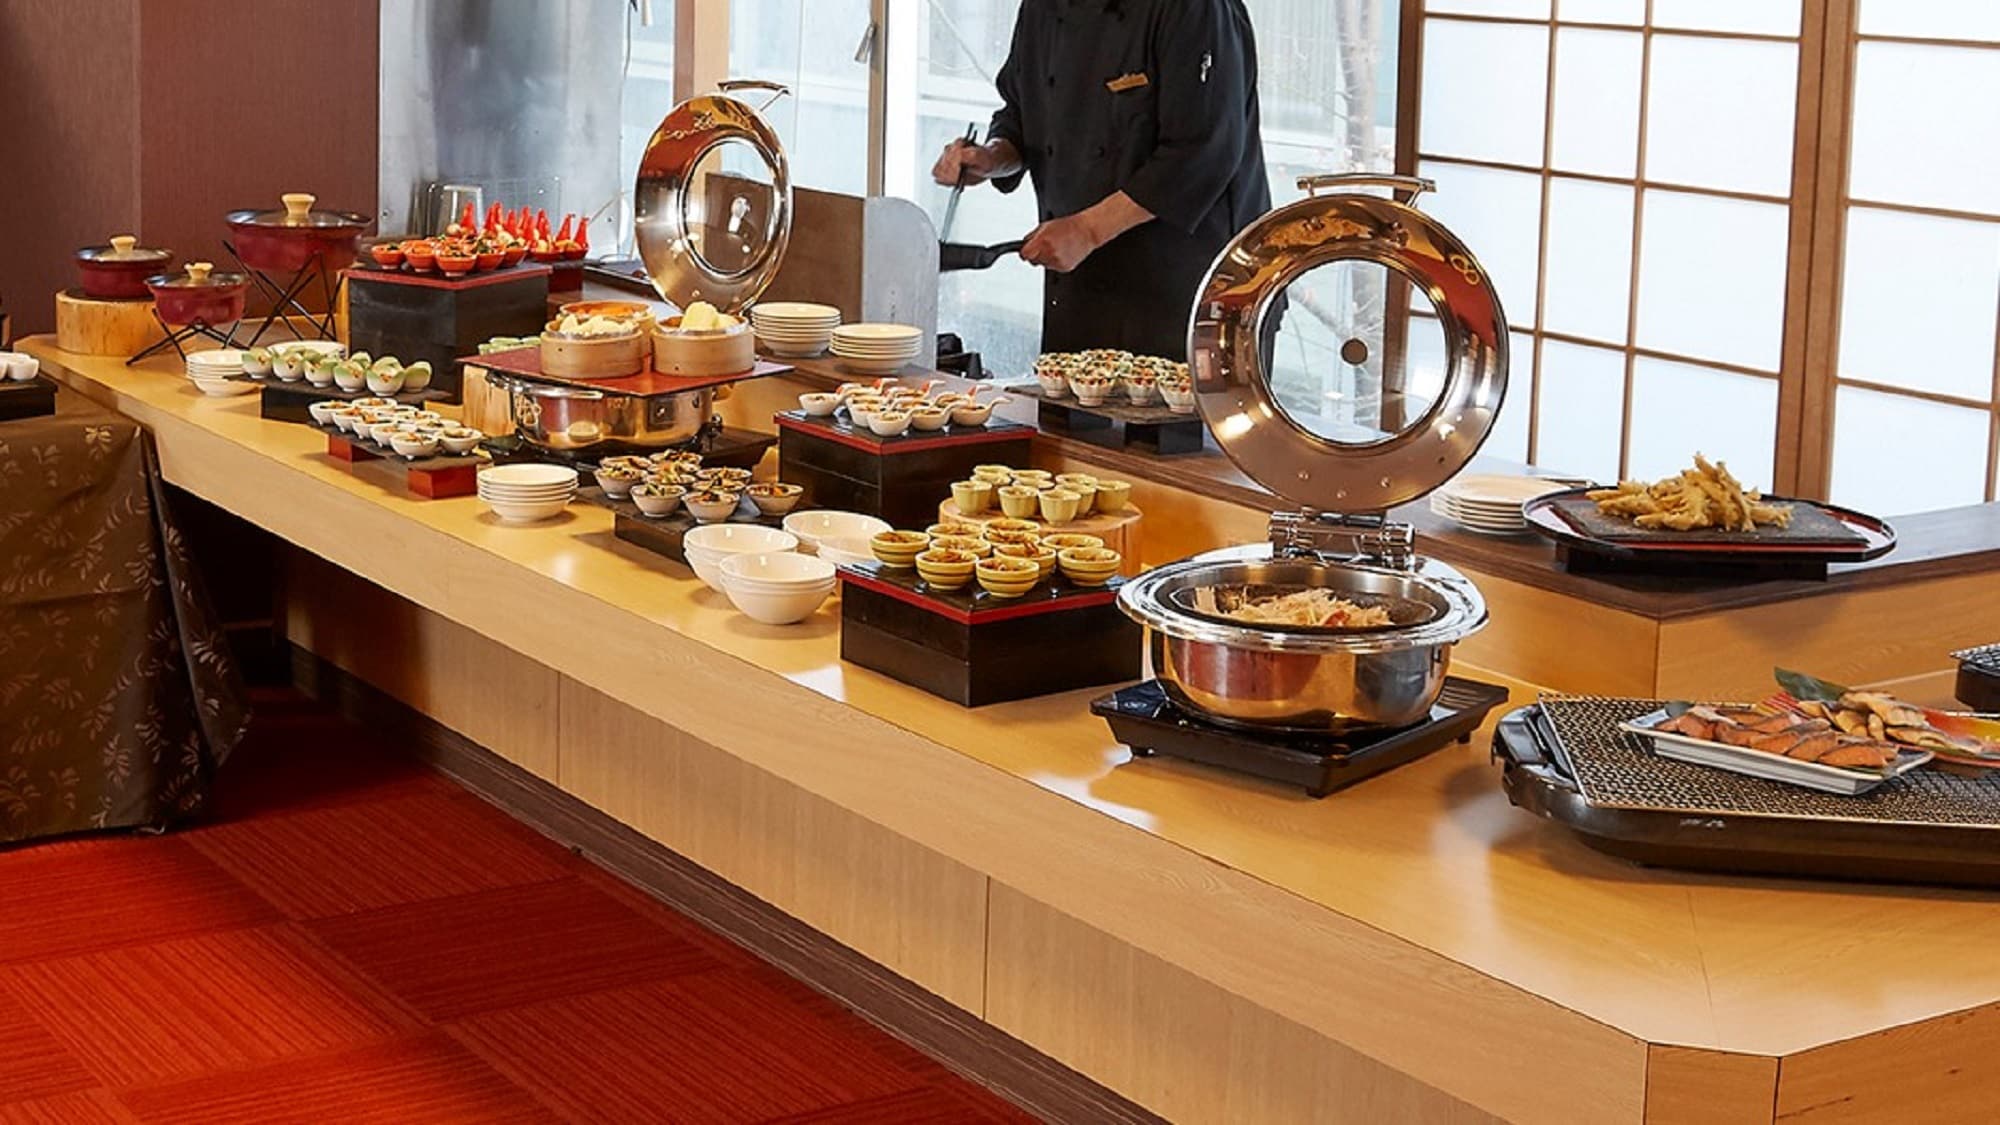 [Breakfast] Renewed to buffet from 2/1! *The content provided changes daily.